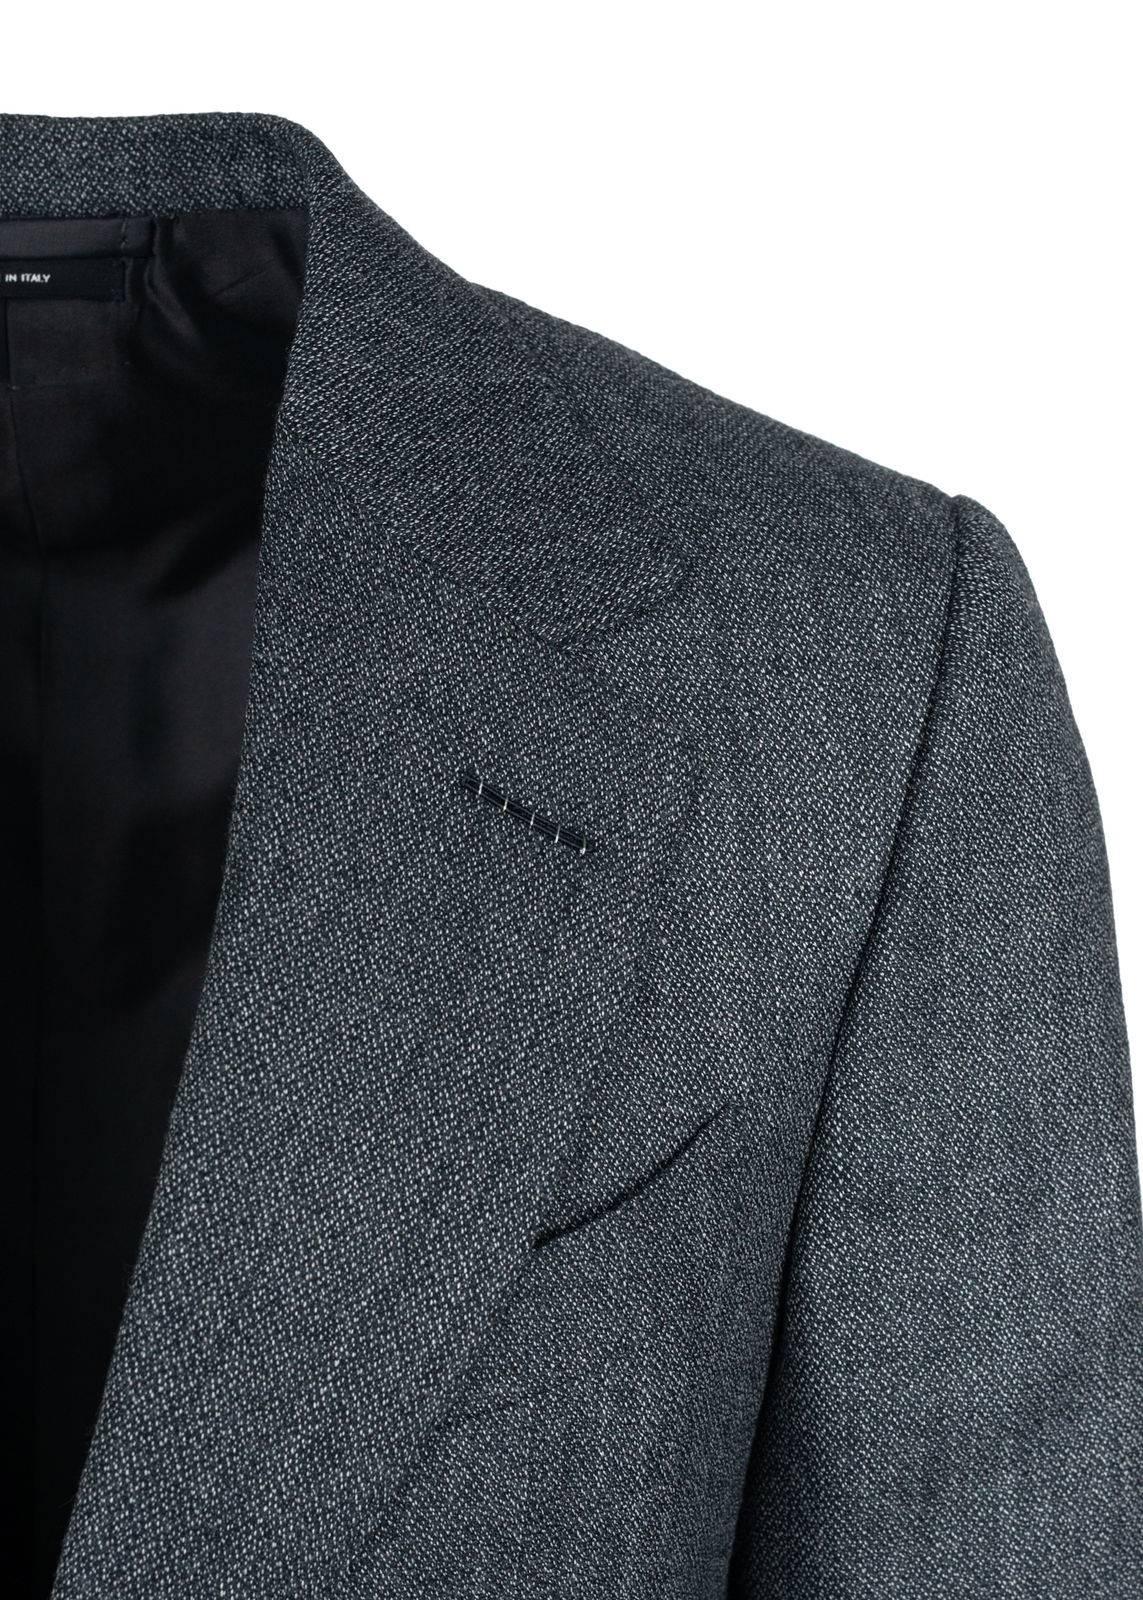 Tom Ford adds an elegant twist to his classic silhouette suit. Crafted of high quality blend of wool and silk this mouline suit features an salt and pepper pattern with a center vent, wide peak lapel jacket and tapered pleated front trousers. This